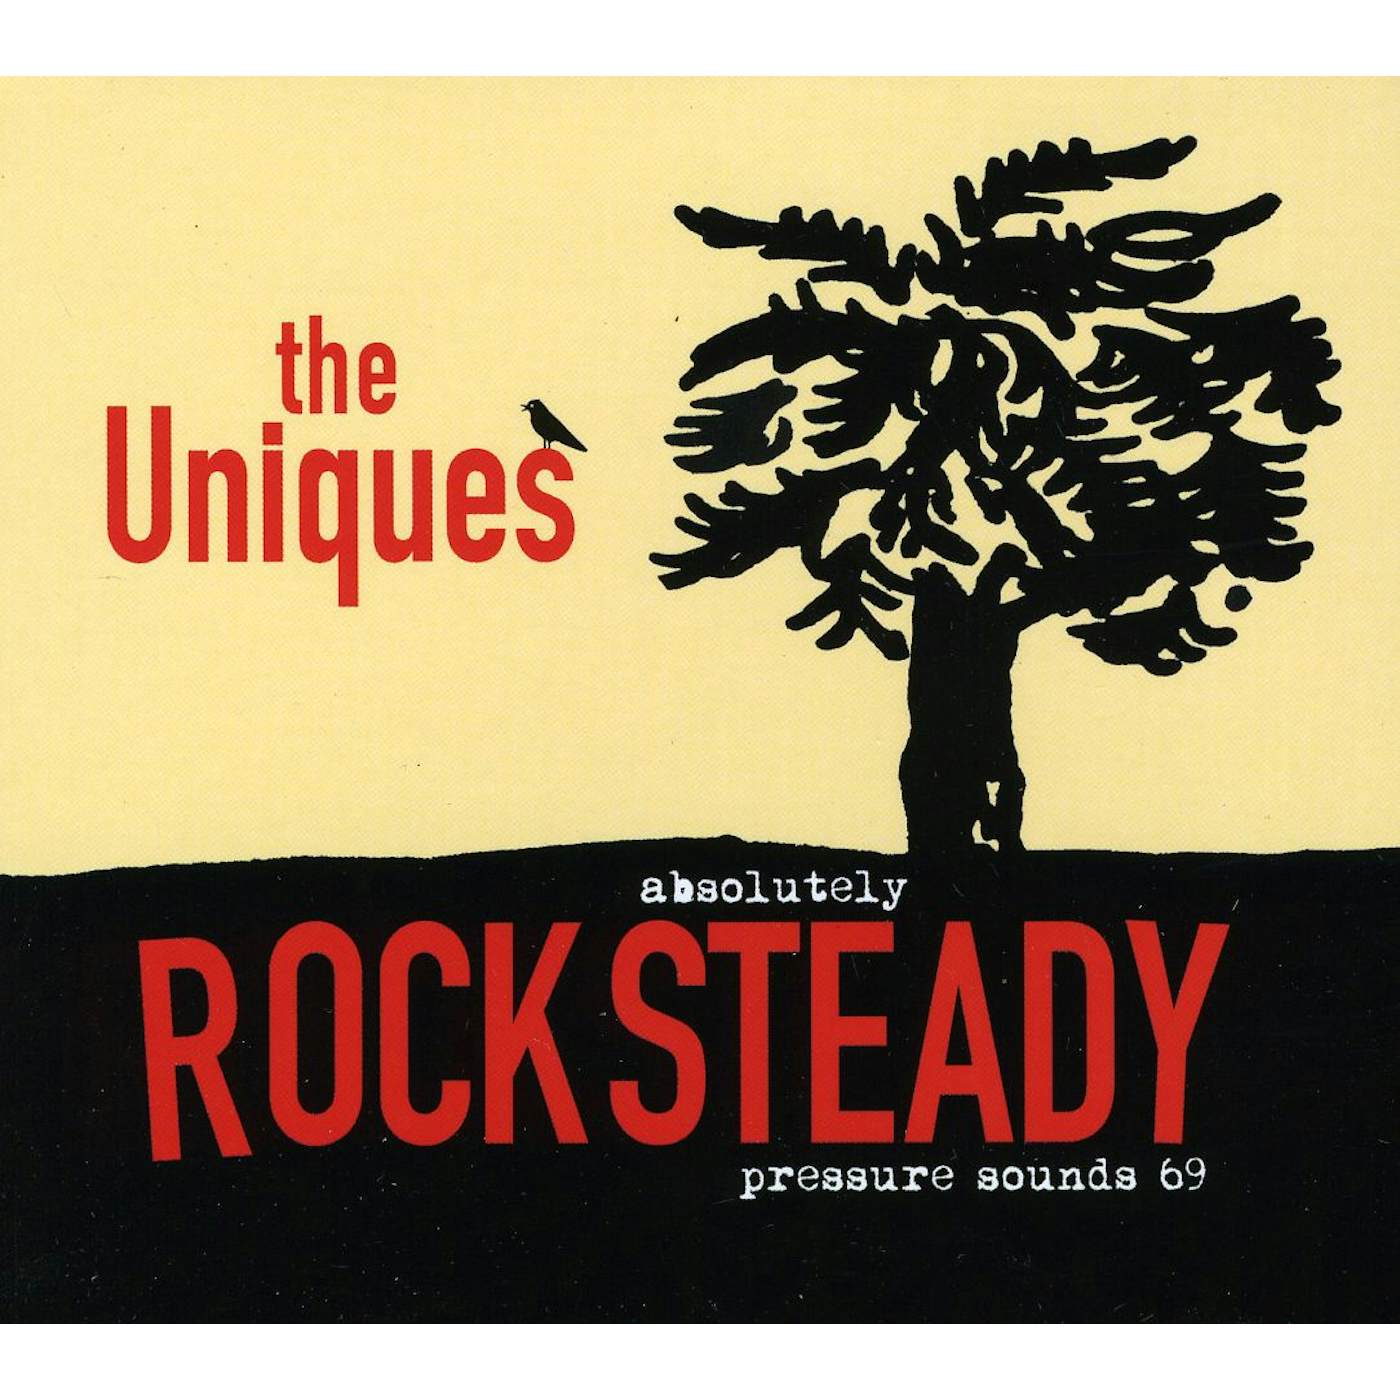 Uniques ABSOLUTLEY ROCKSTEADY CD